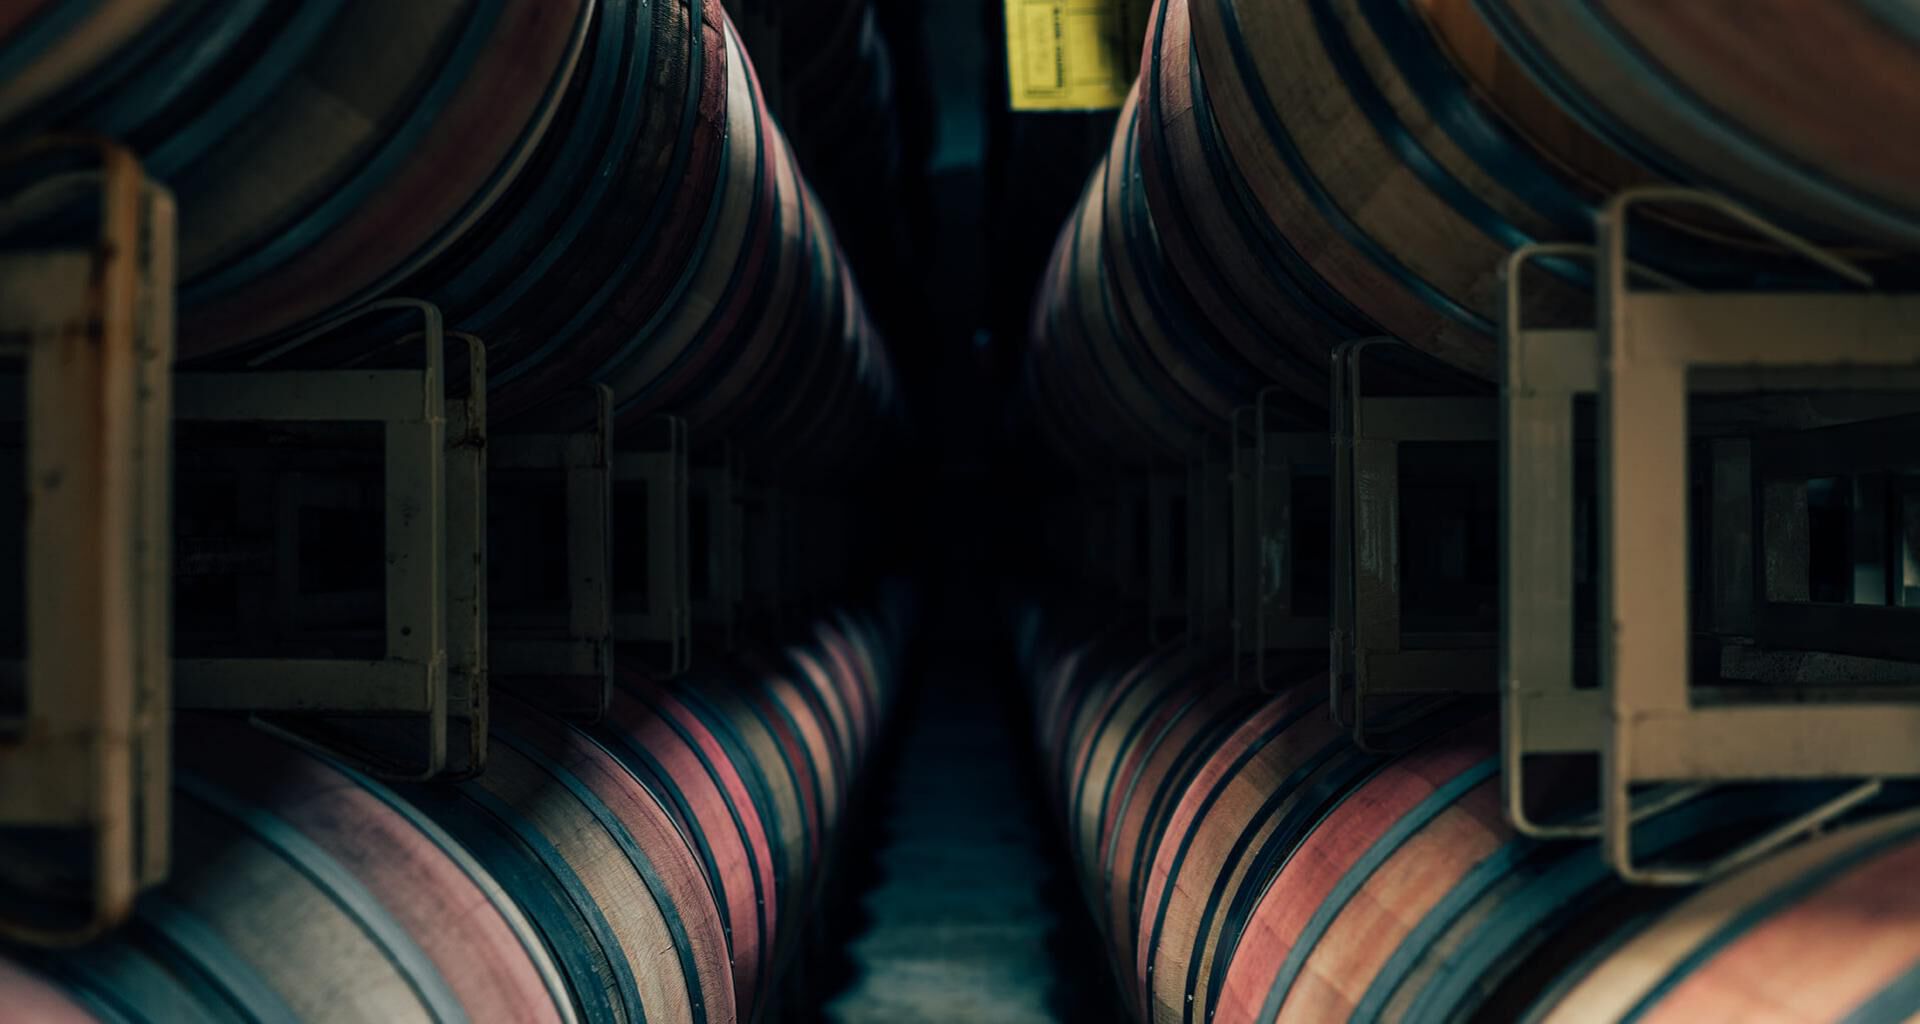 Looking down a row of wine barrels